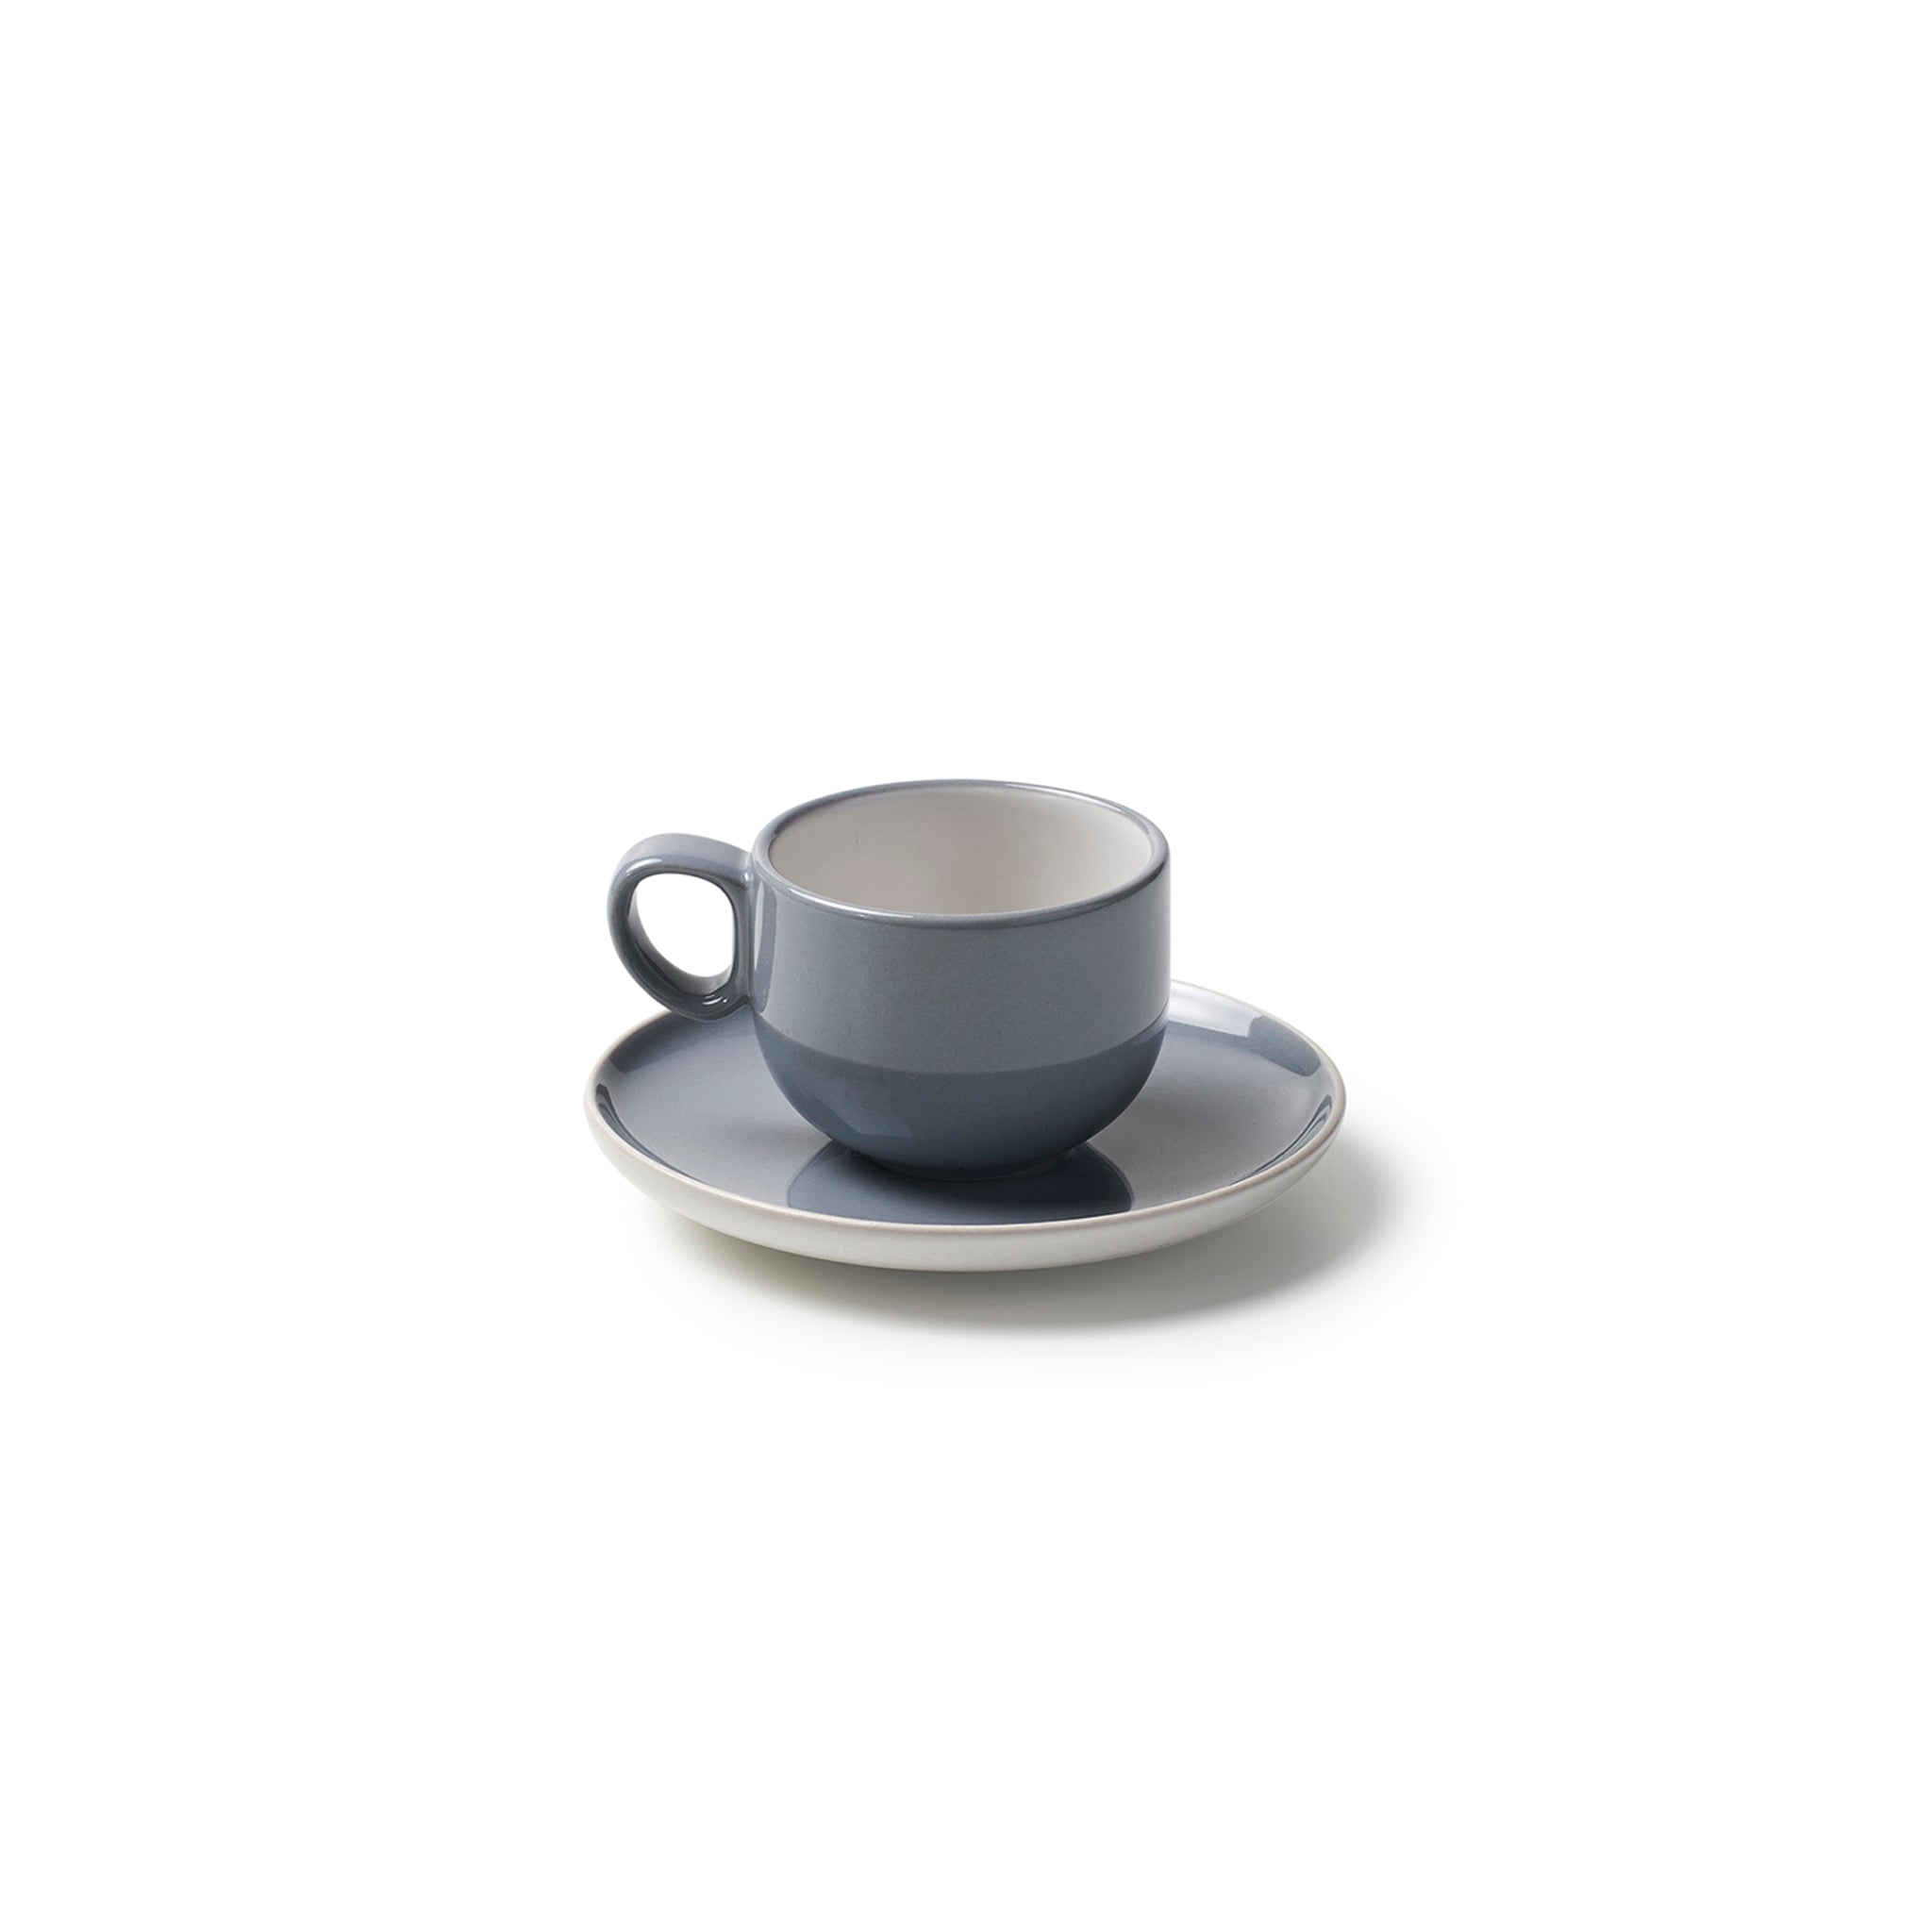 Elegant Durable and Colorful Porcelain Espresso Cup and Saucer Set